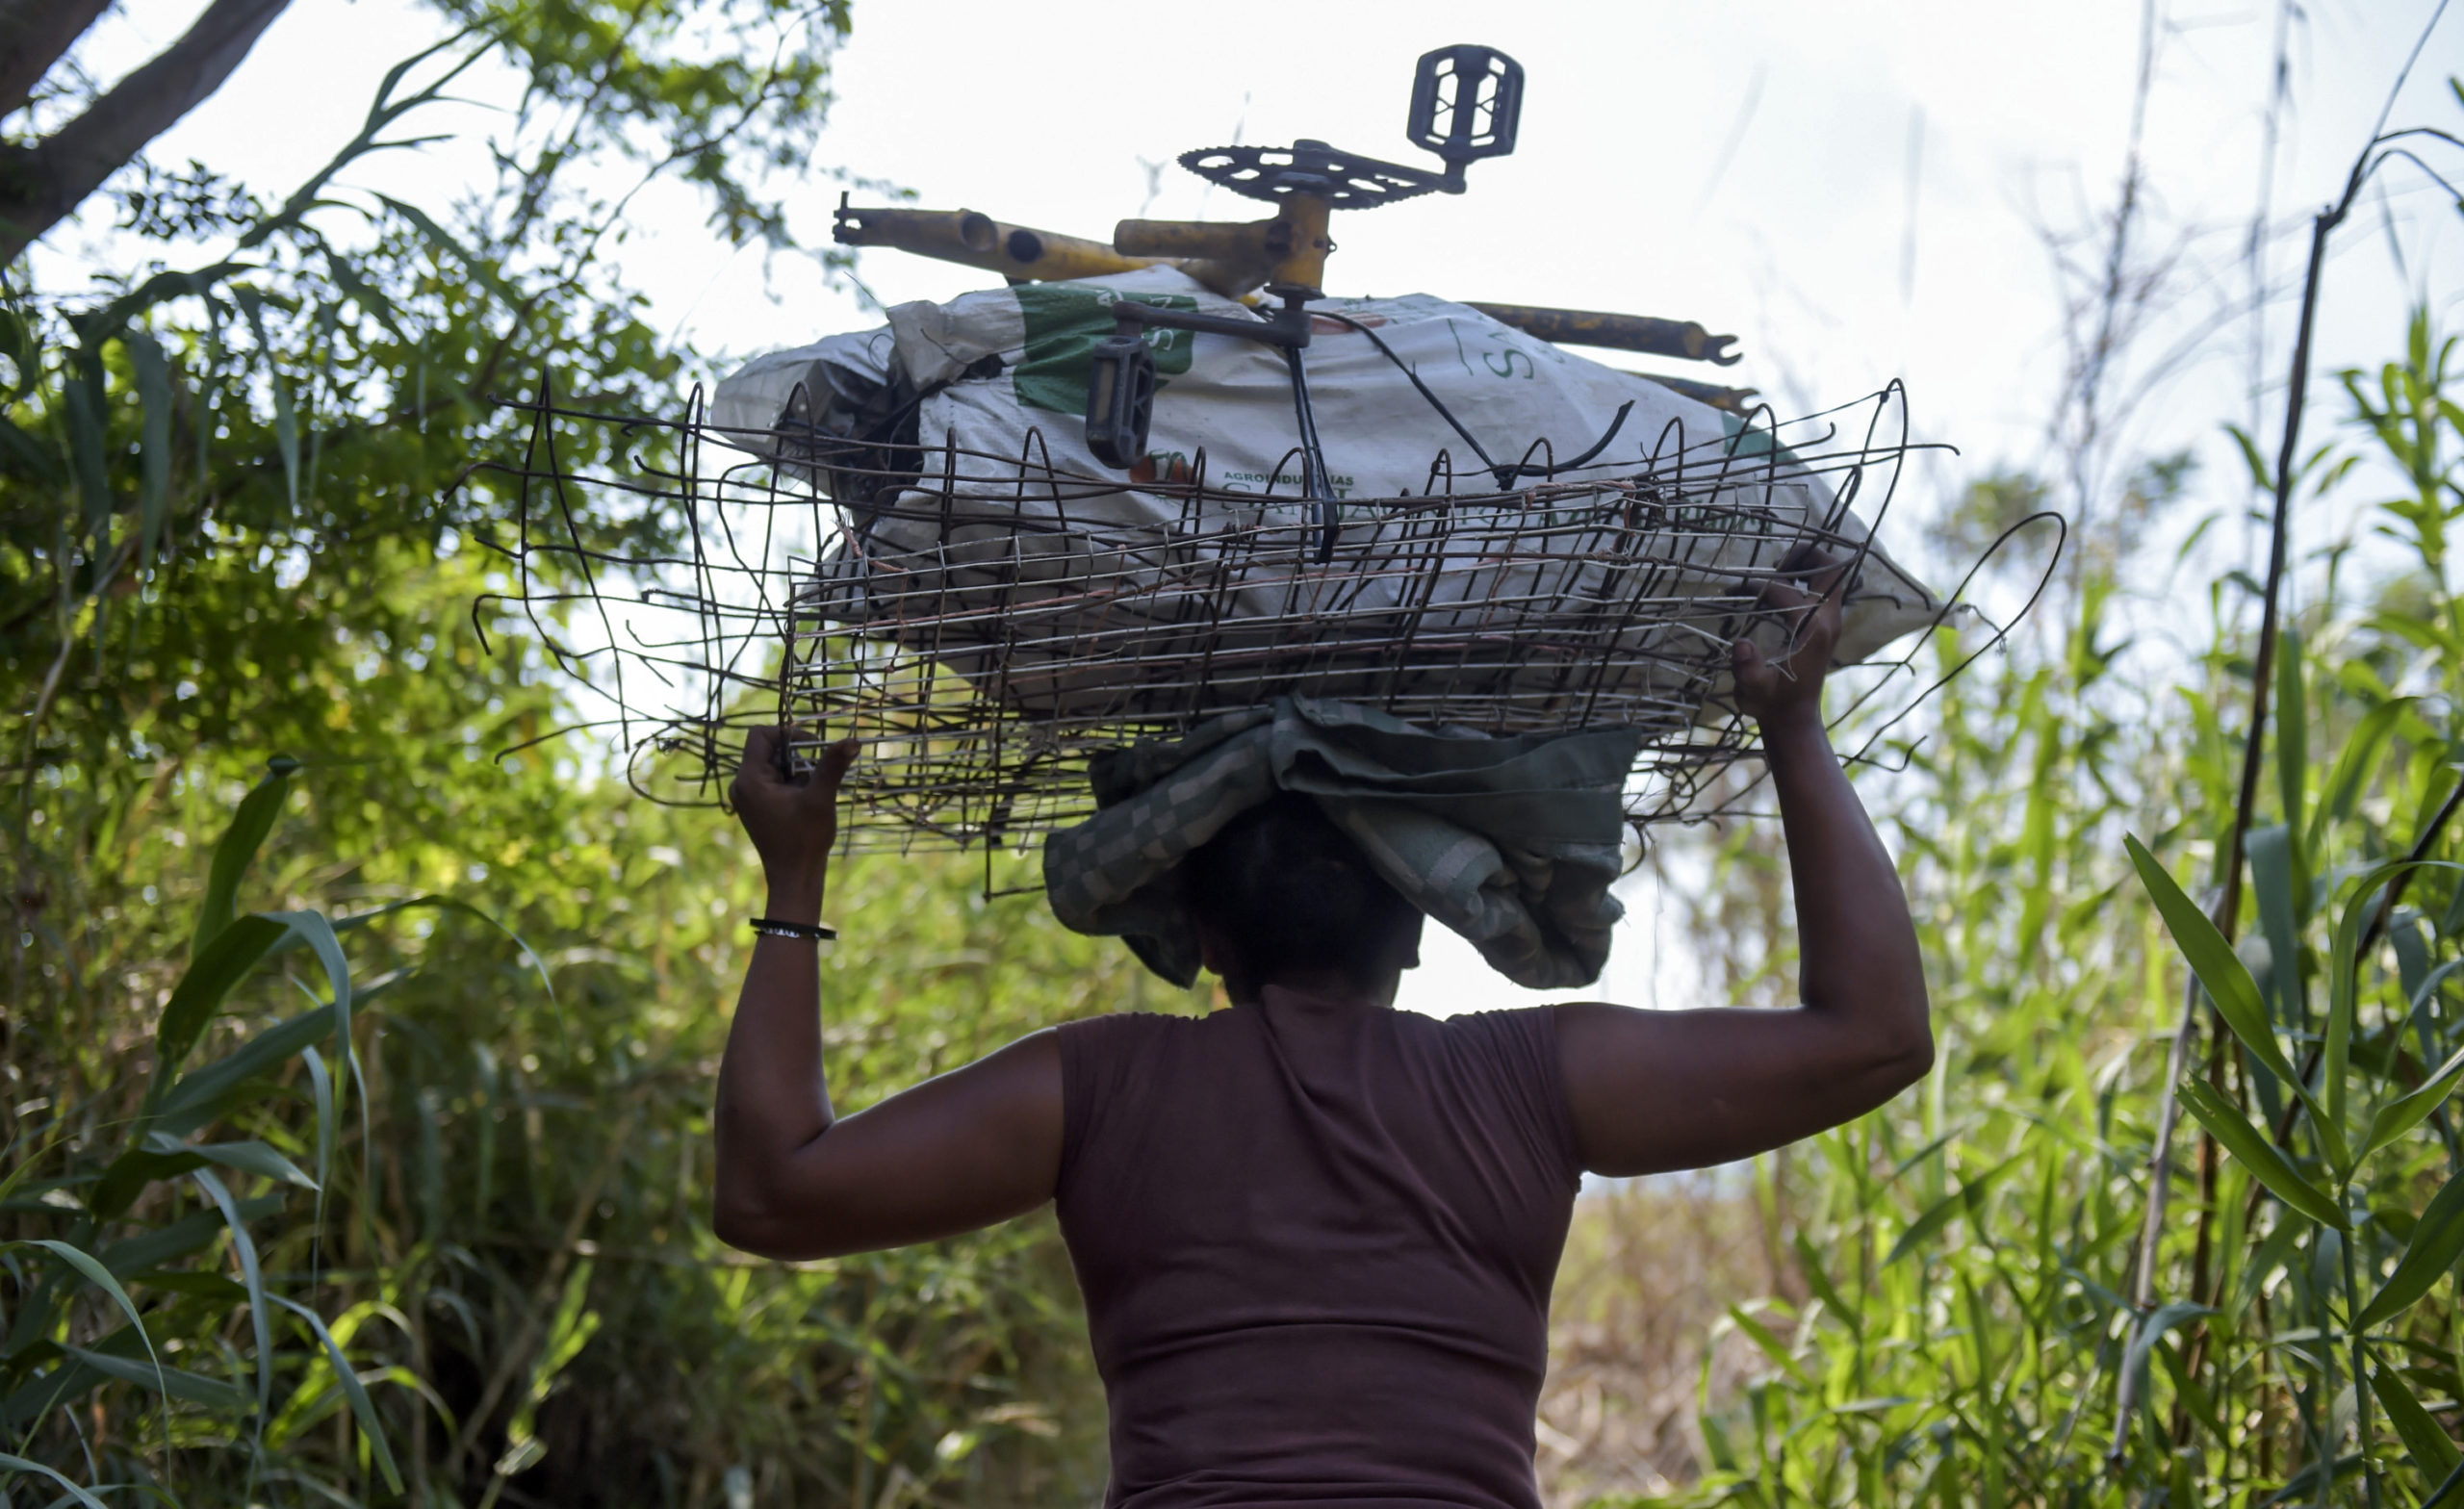 A view of a woman carrying scrap metal on her head